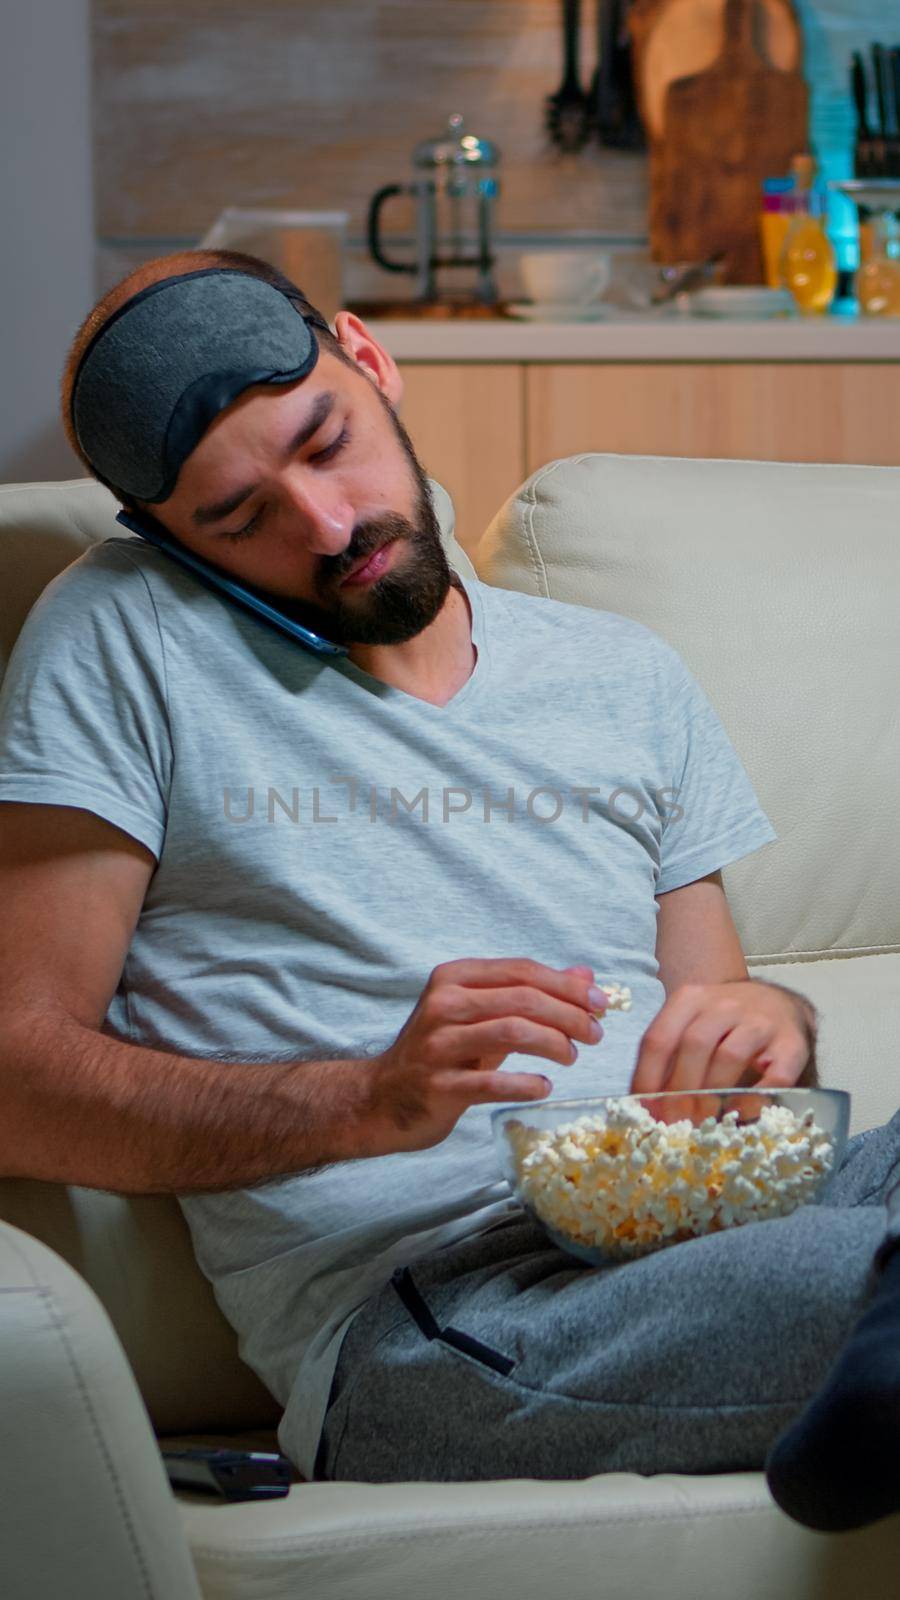 Relaxed man talking about internet connection on smartphone. Caucasian male sitting on couch watching entertainment movies while eating popcorn late at night in kitchen